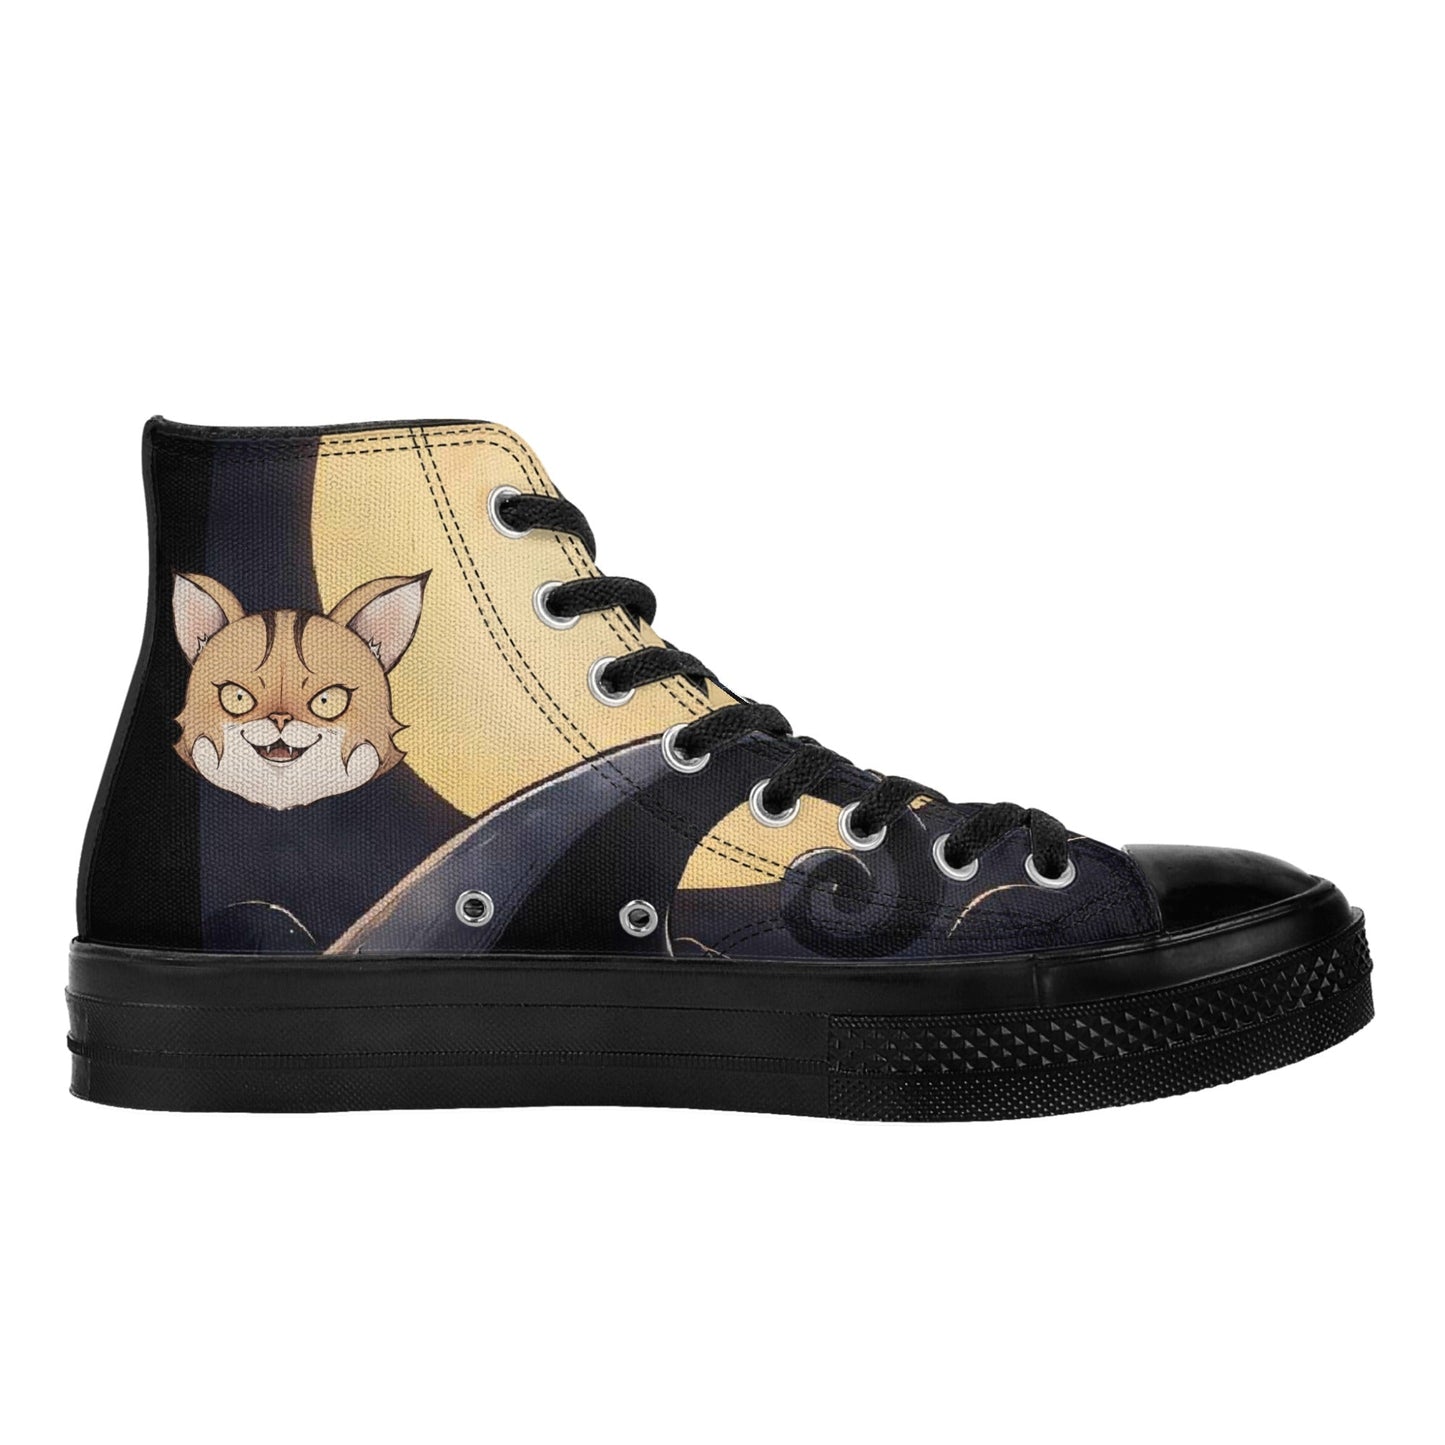 Stand out  with the  Nightmare Before HeyNugget Womens Classic Black High Top Canvas Shoes  available at Hey Nugget. Grab yours today!